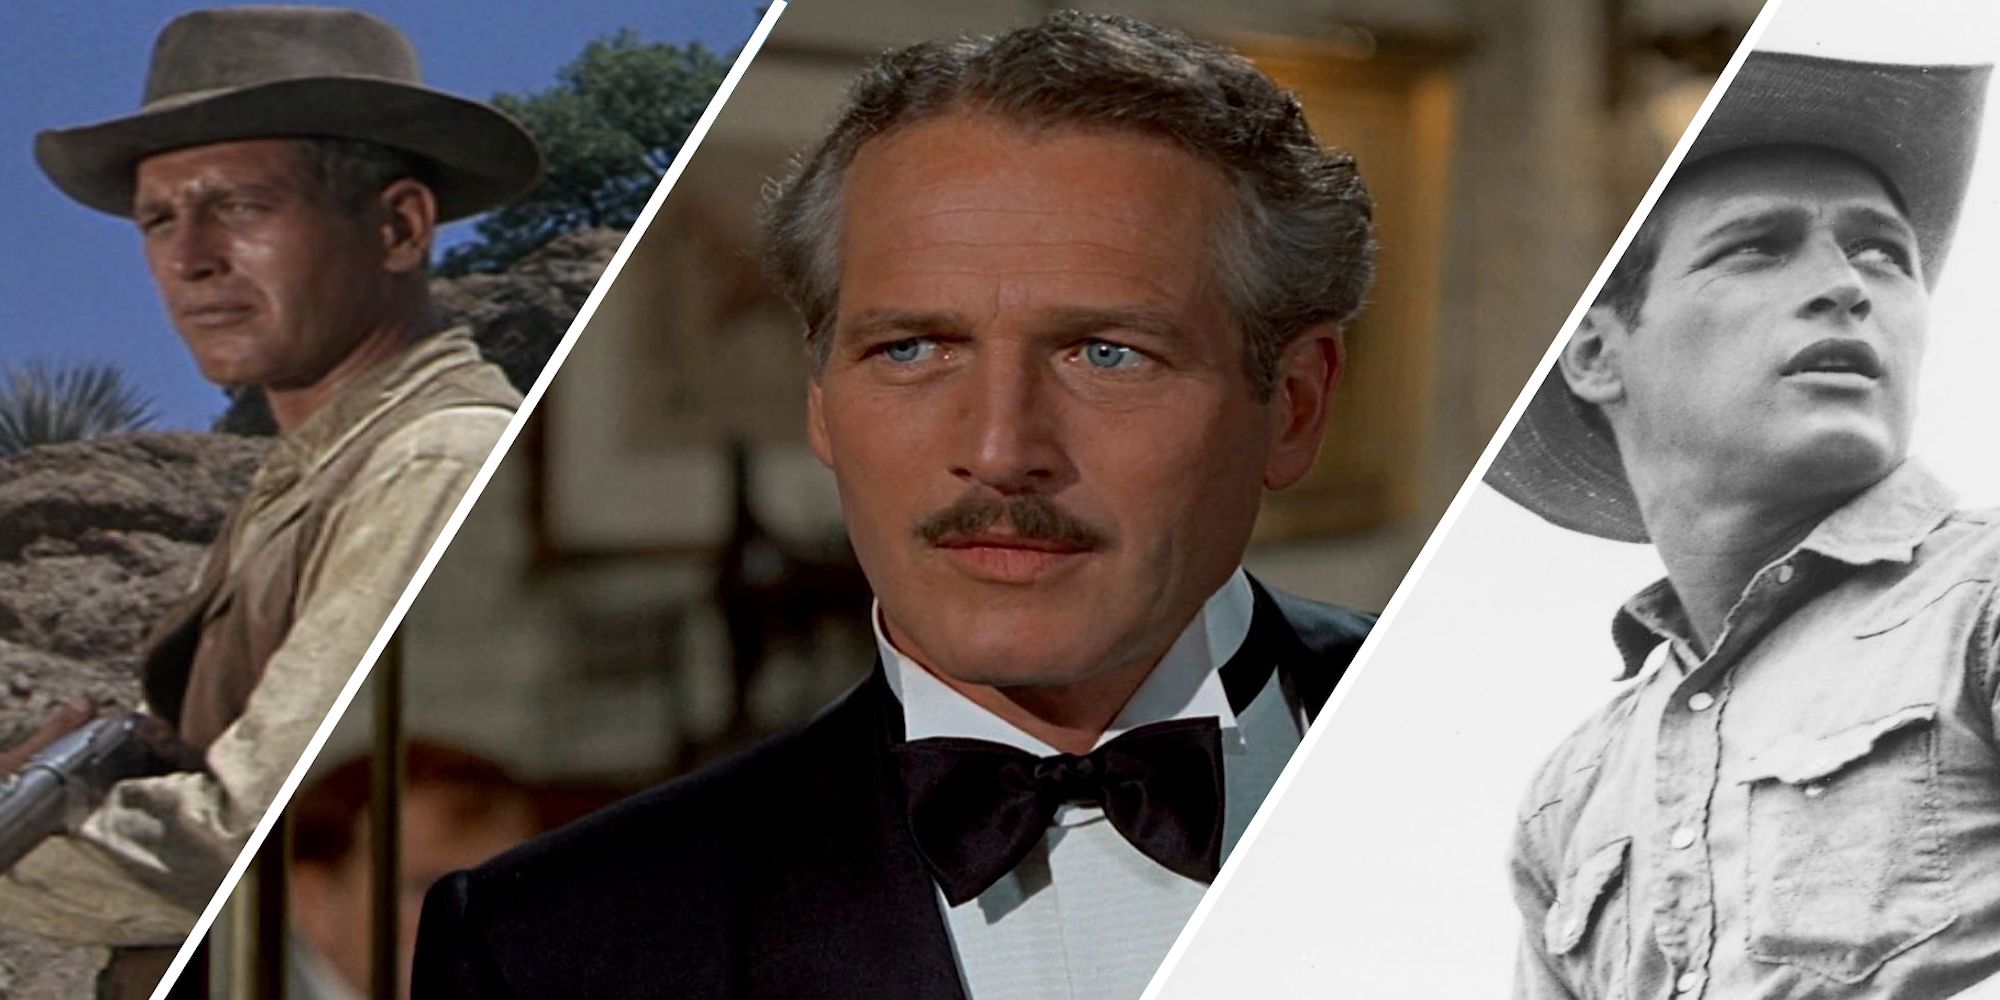 10 Best Paul Newman Movies, According to Rotten Tomatoes